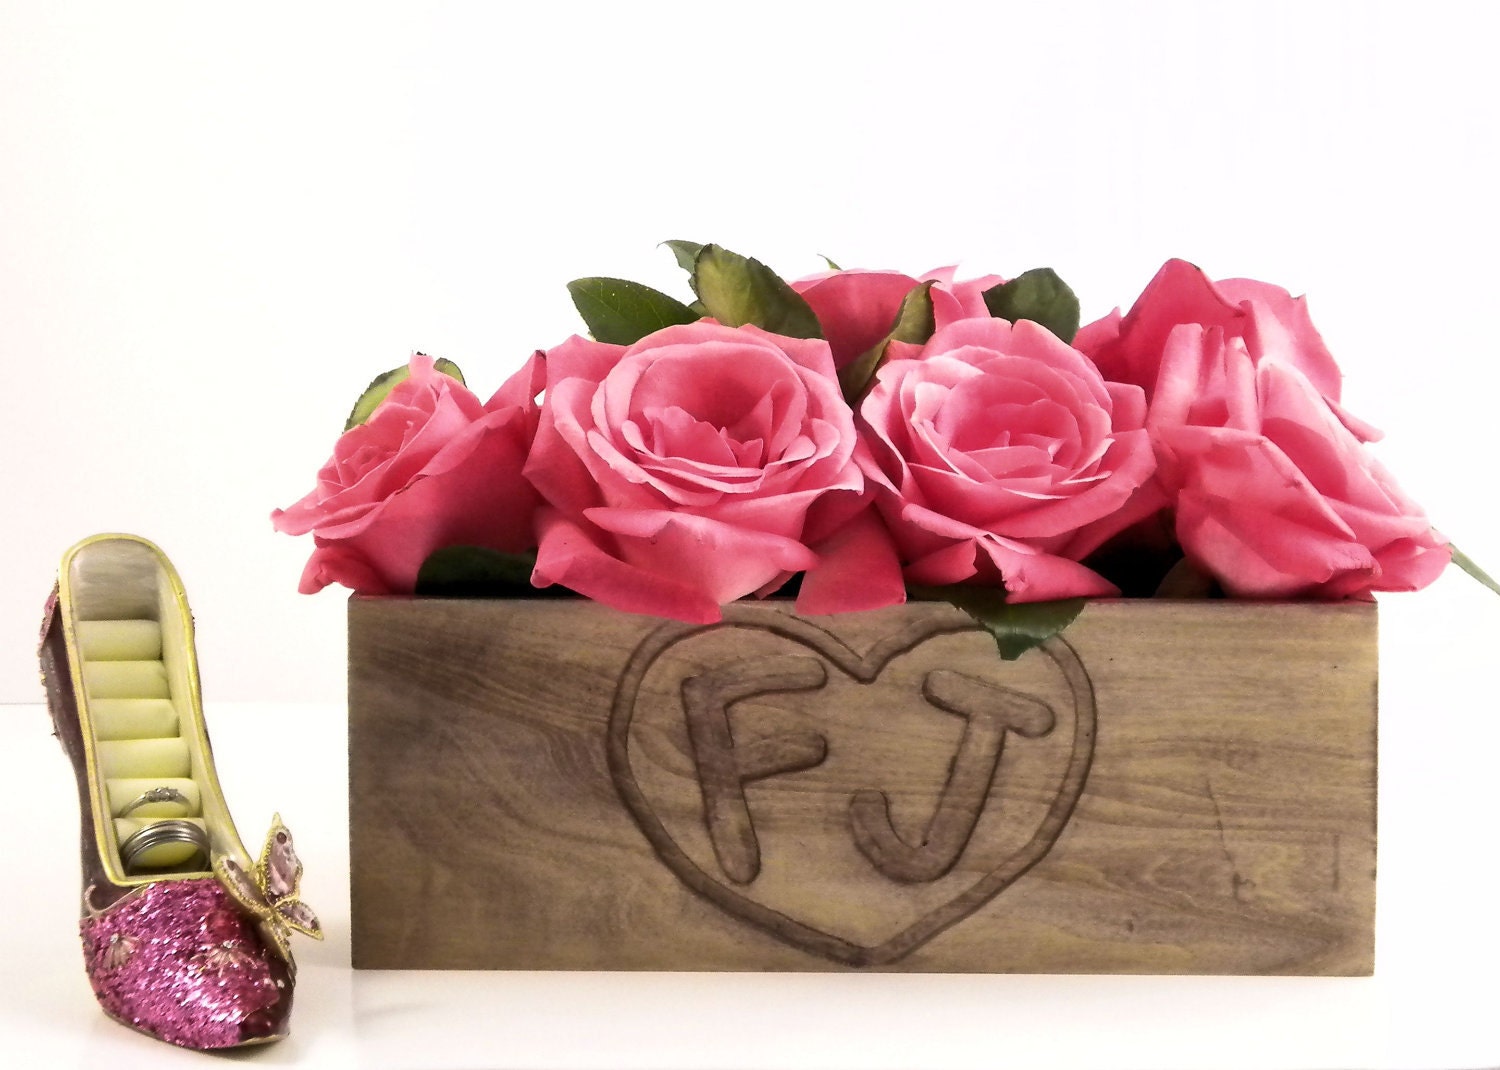 Wood flower box for Country/rustic wedding table Centerpieces, Wooden Heart Box with Engraving - WoodenEnhancements